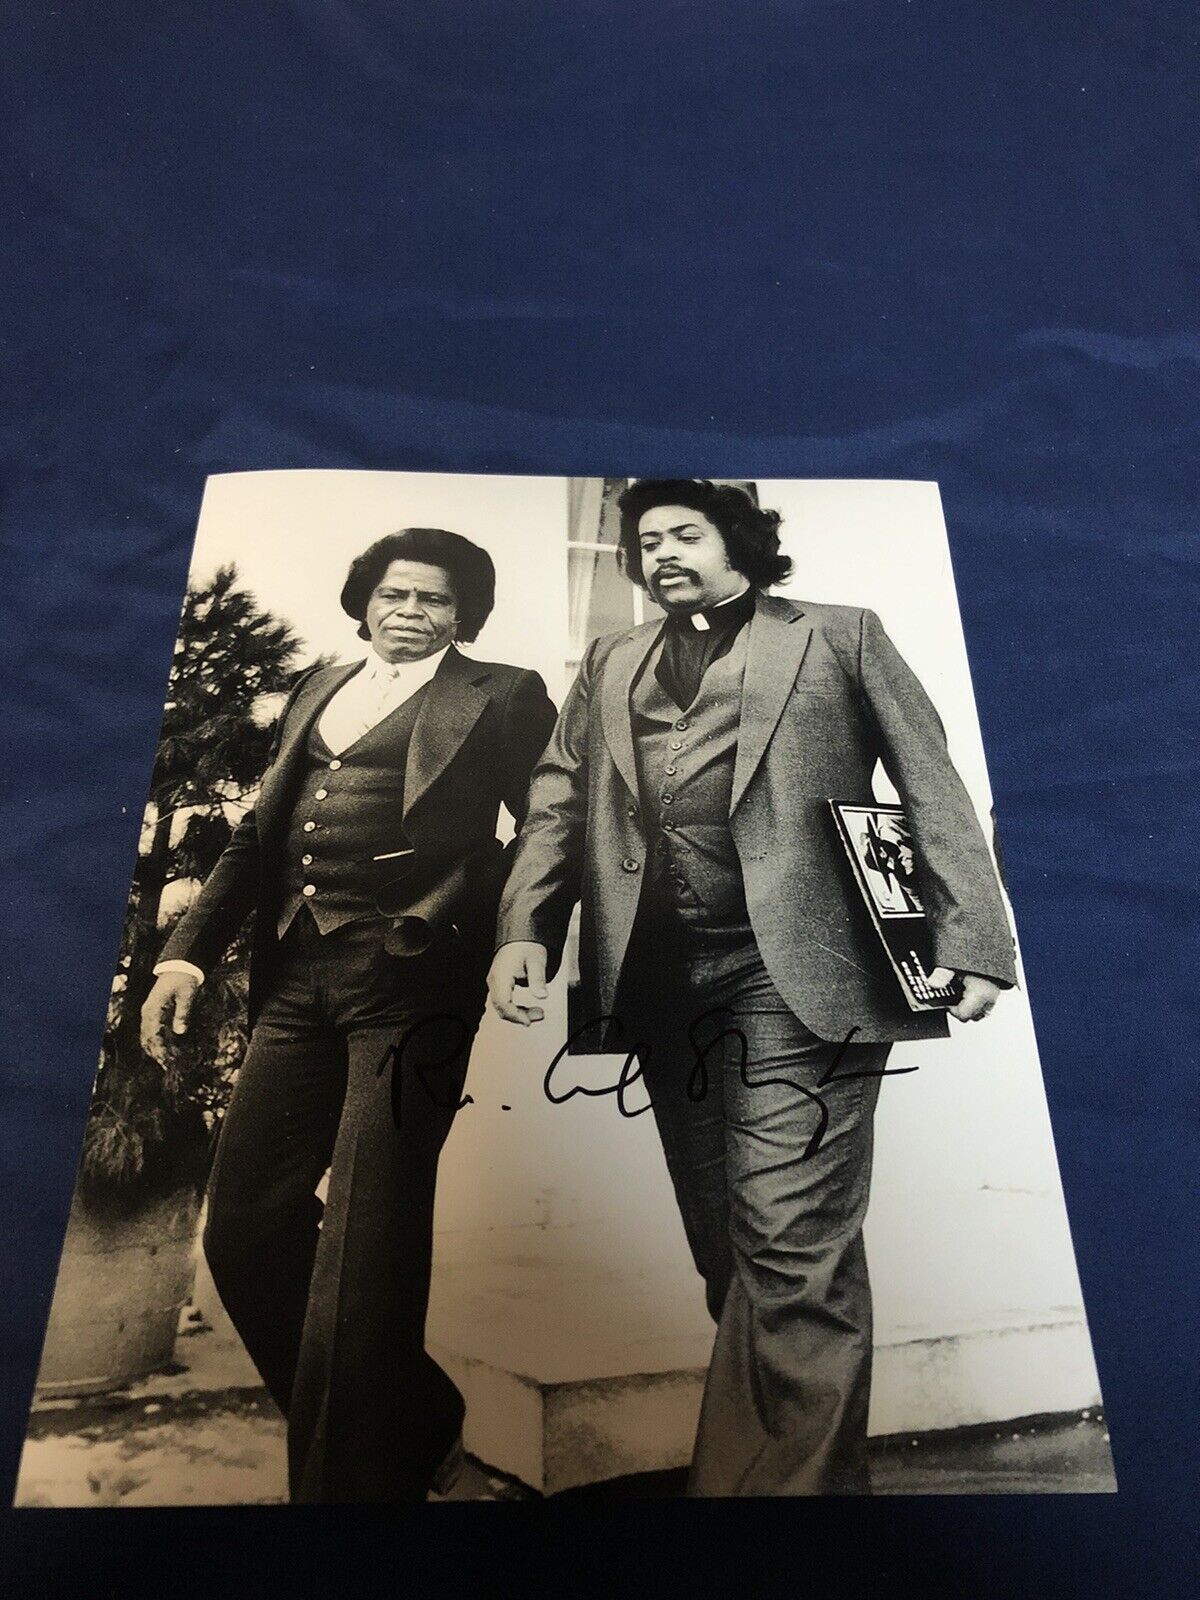 THE REVEREND AL SHARPTON SIGNED AUTOGRAPHED 8X10 PHOTO WITH JAMES BROWN PROOF